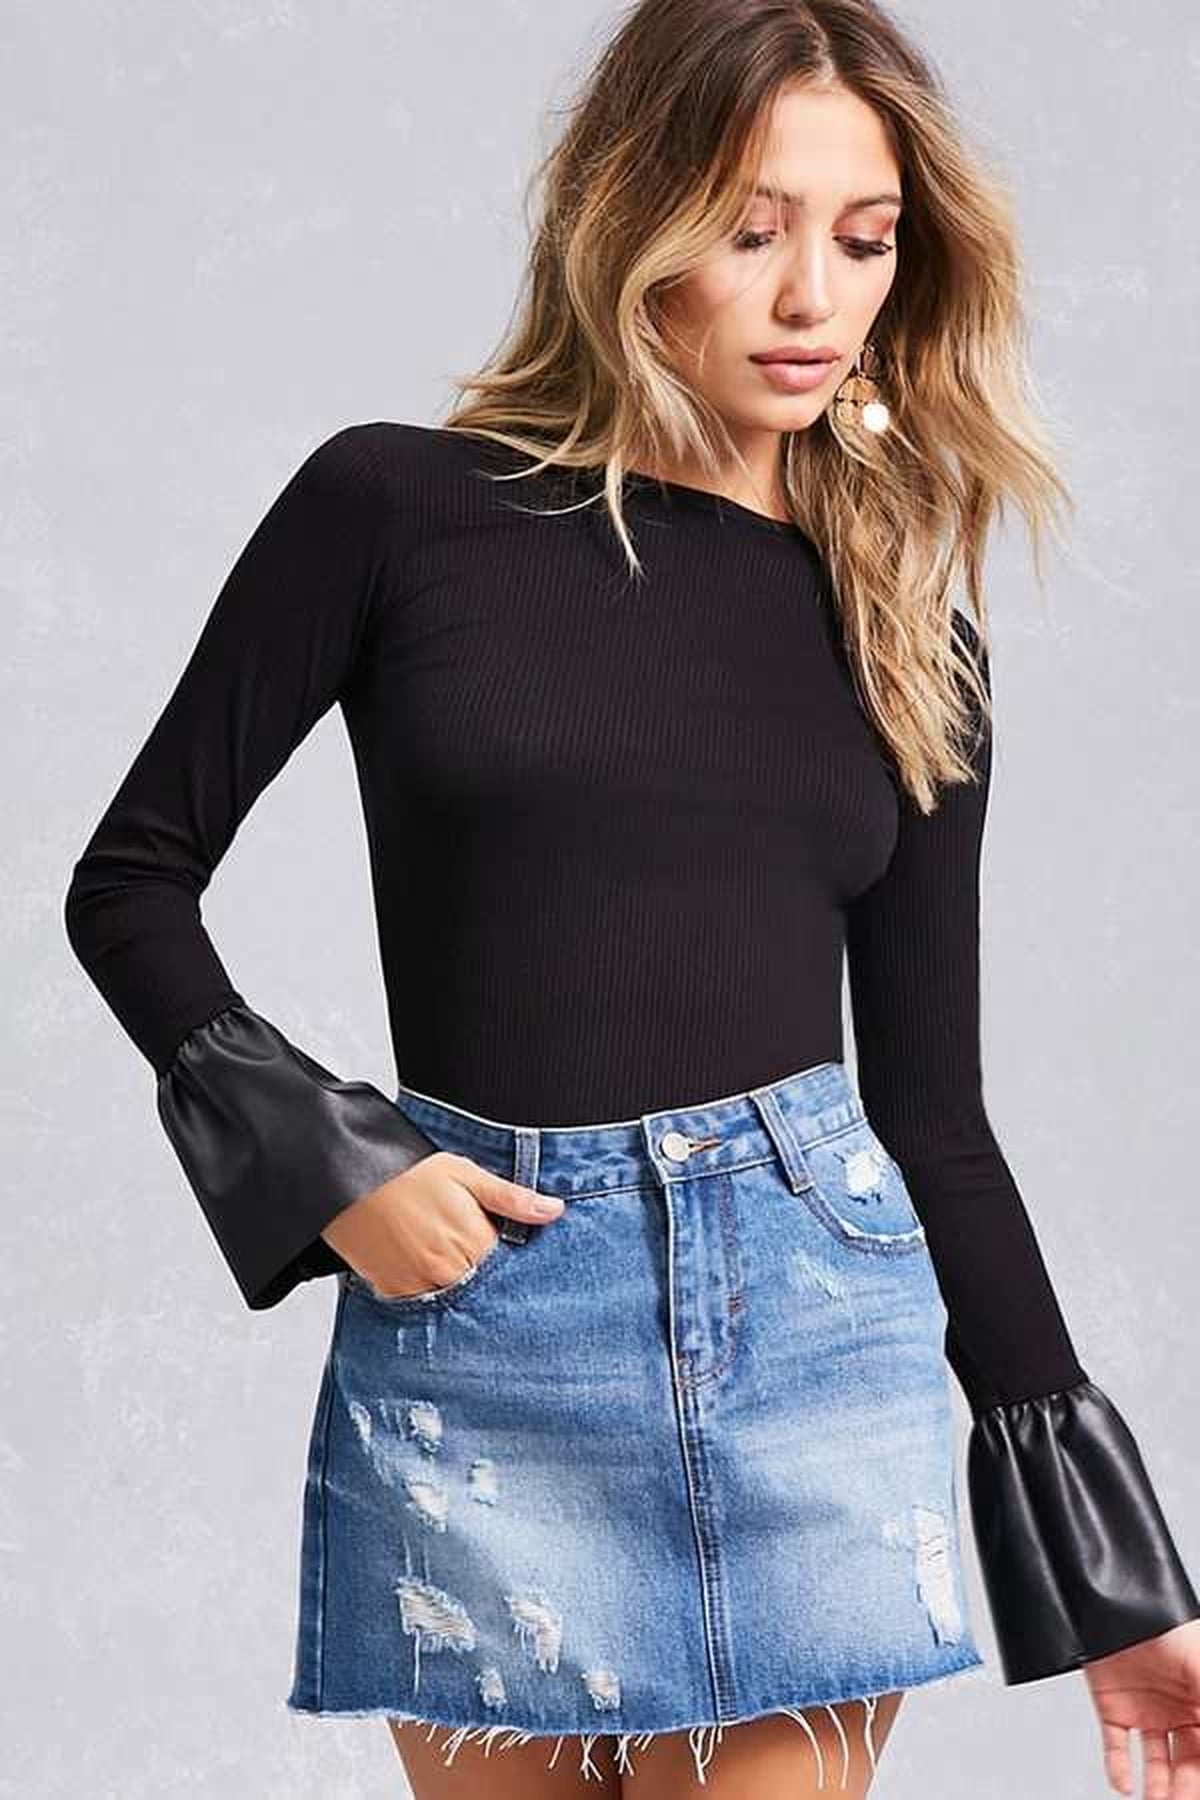 Fall Outfit Ideas From Forever 21 | POPSUGAR Fashion